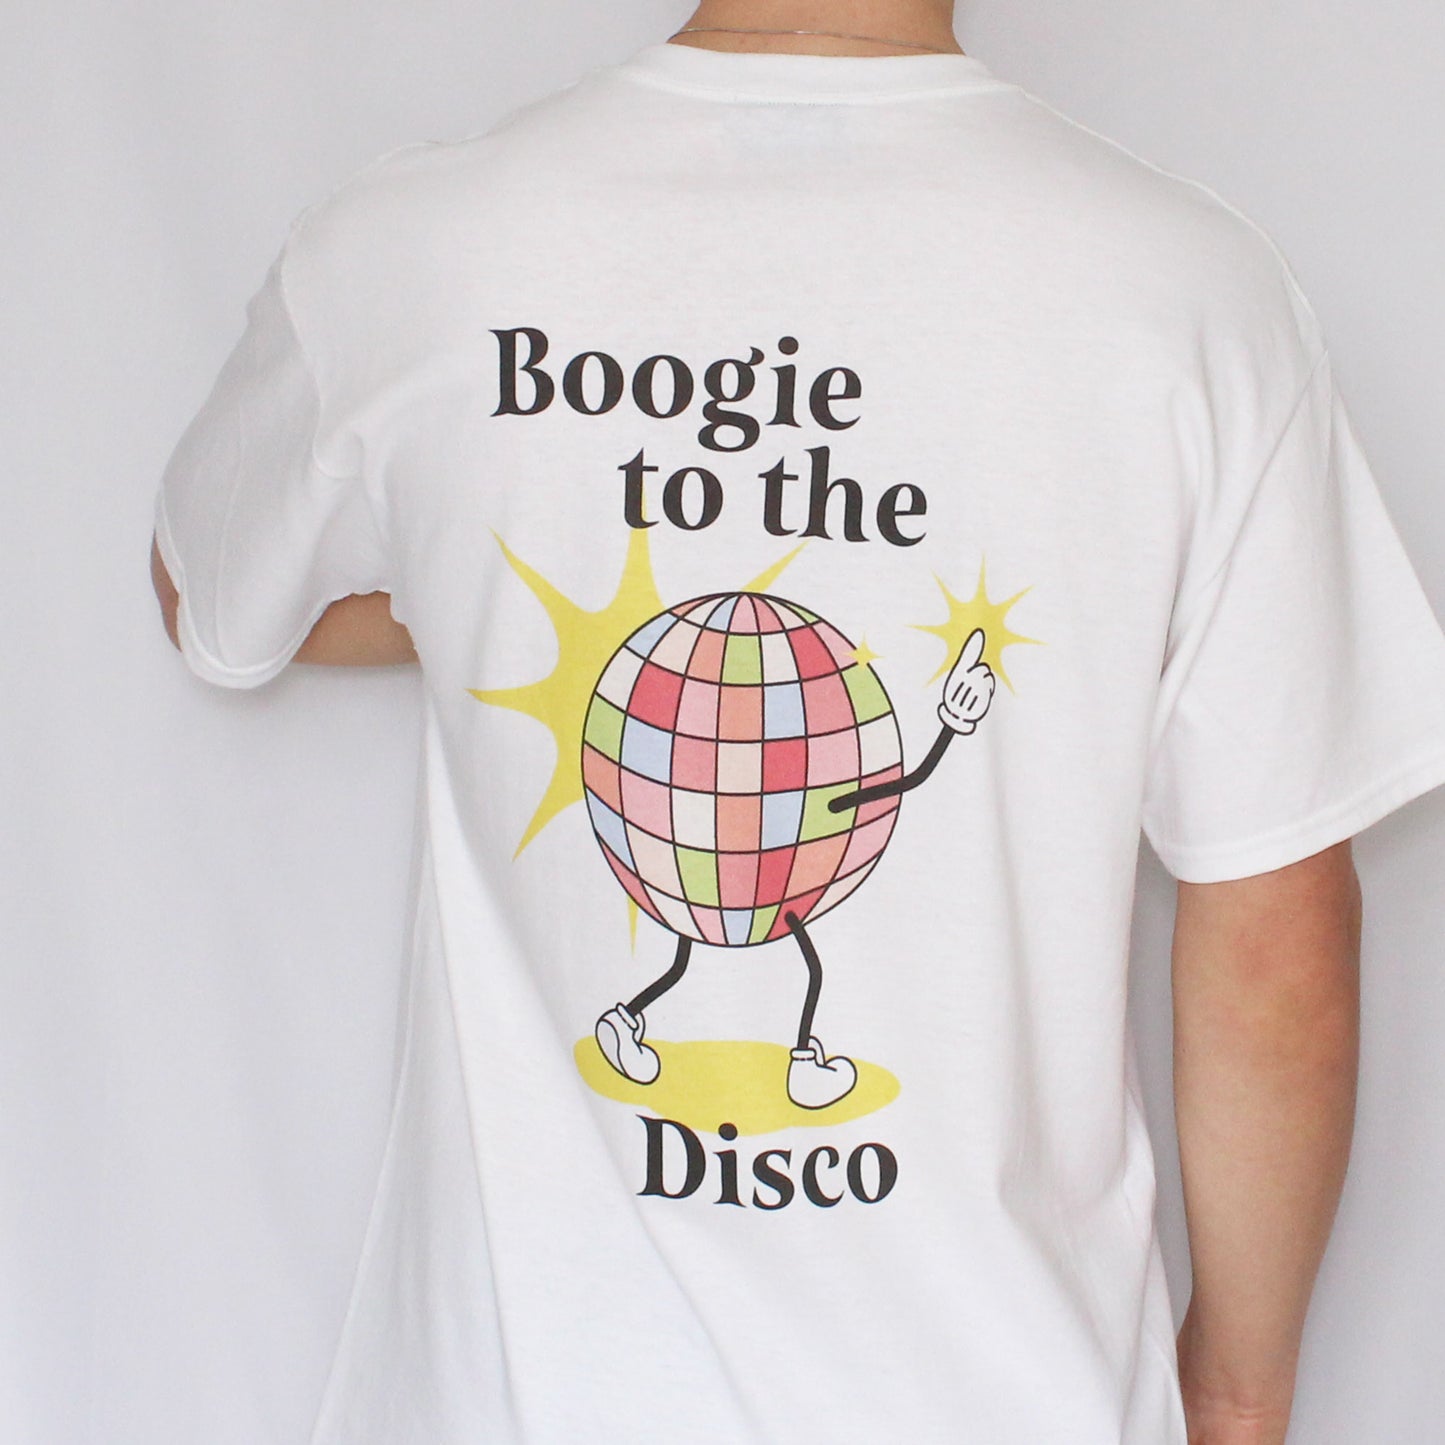 Boogie To The Disco